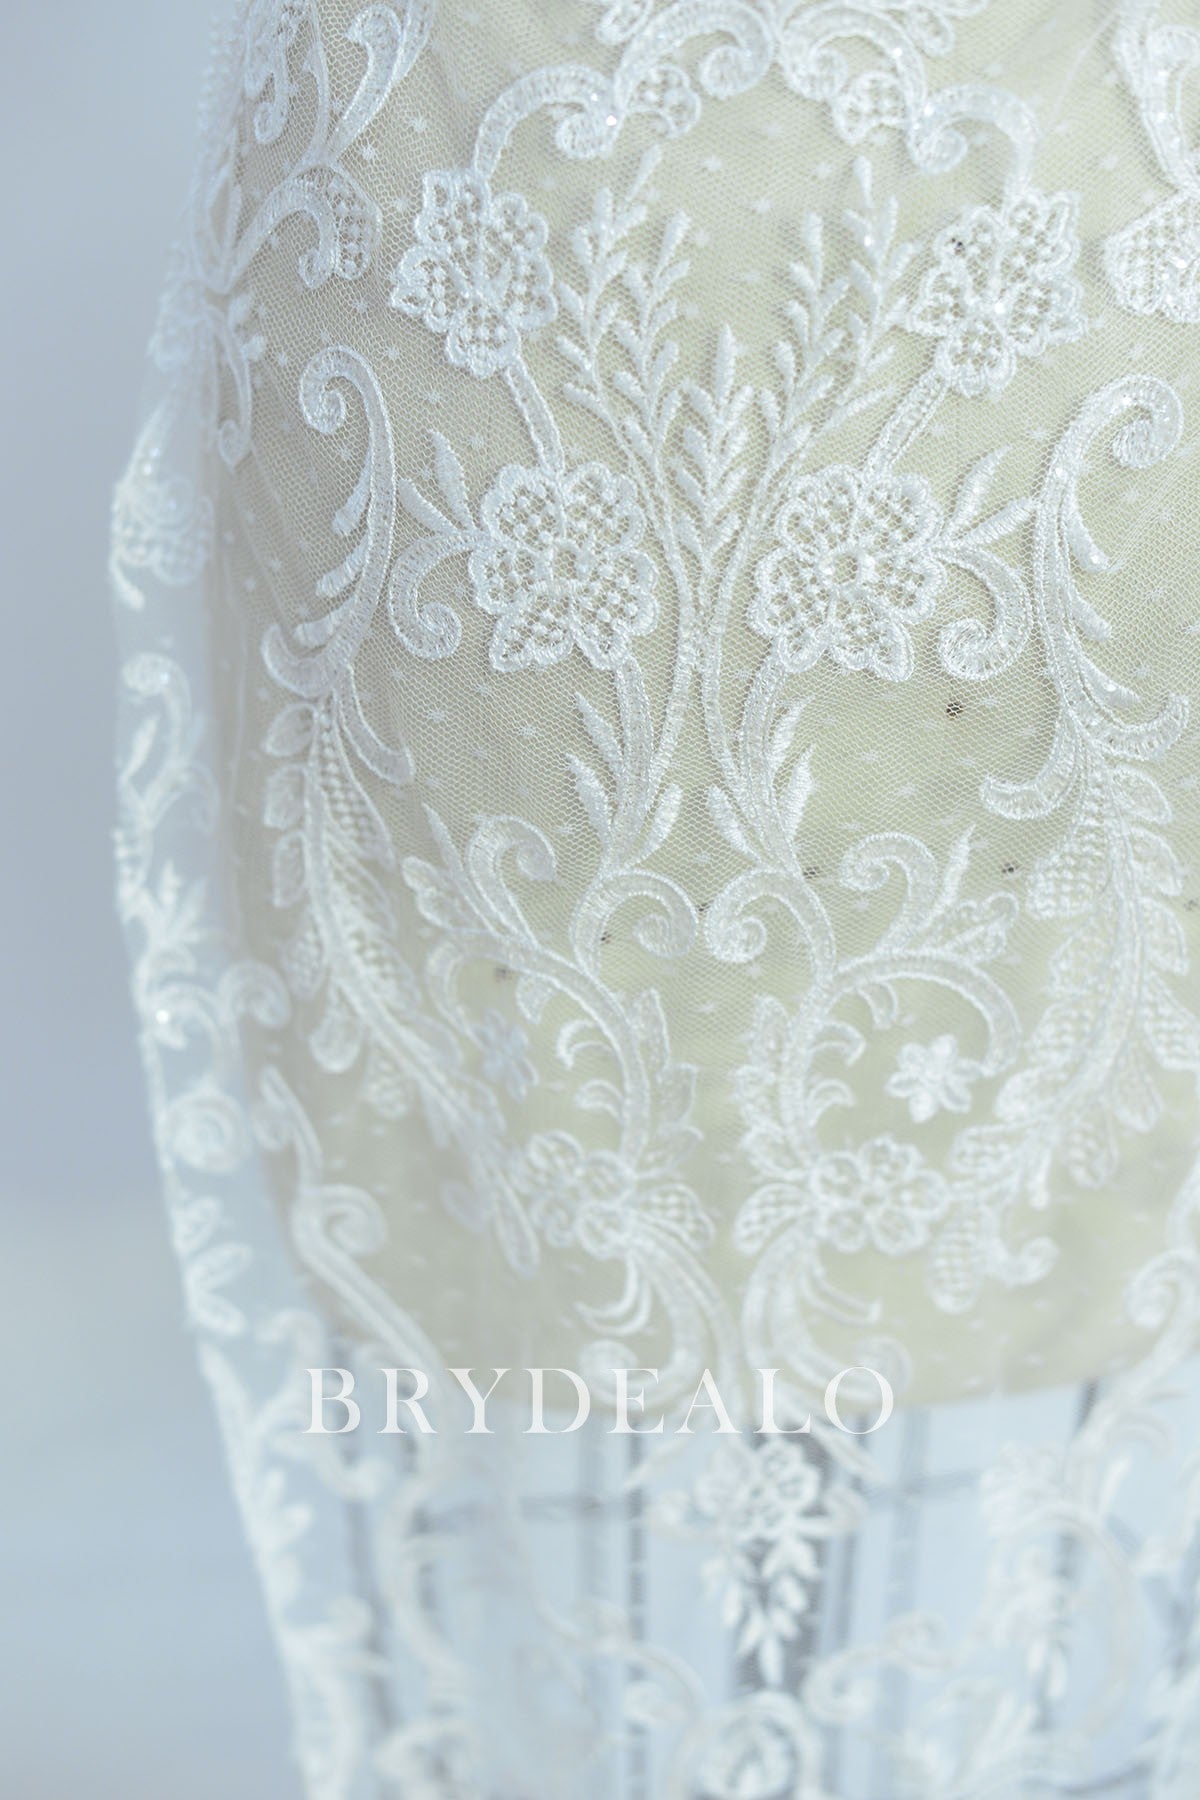 Best Glamorous Symmetrical Corded Lace Fabric Online